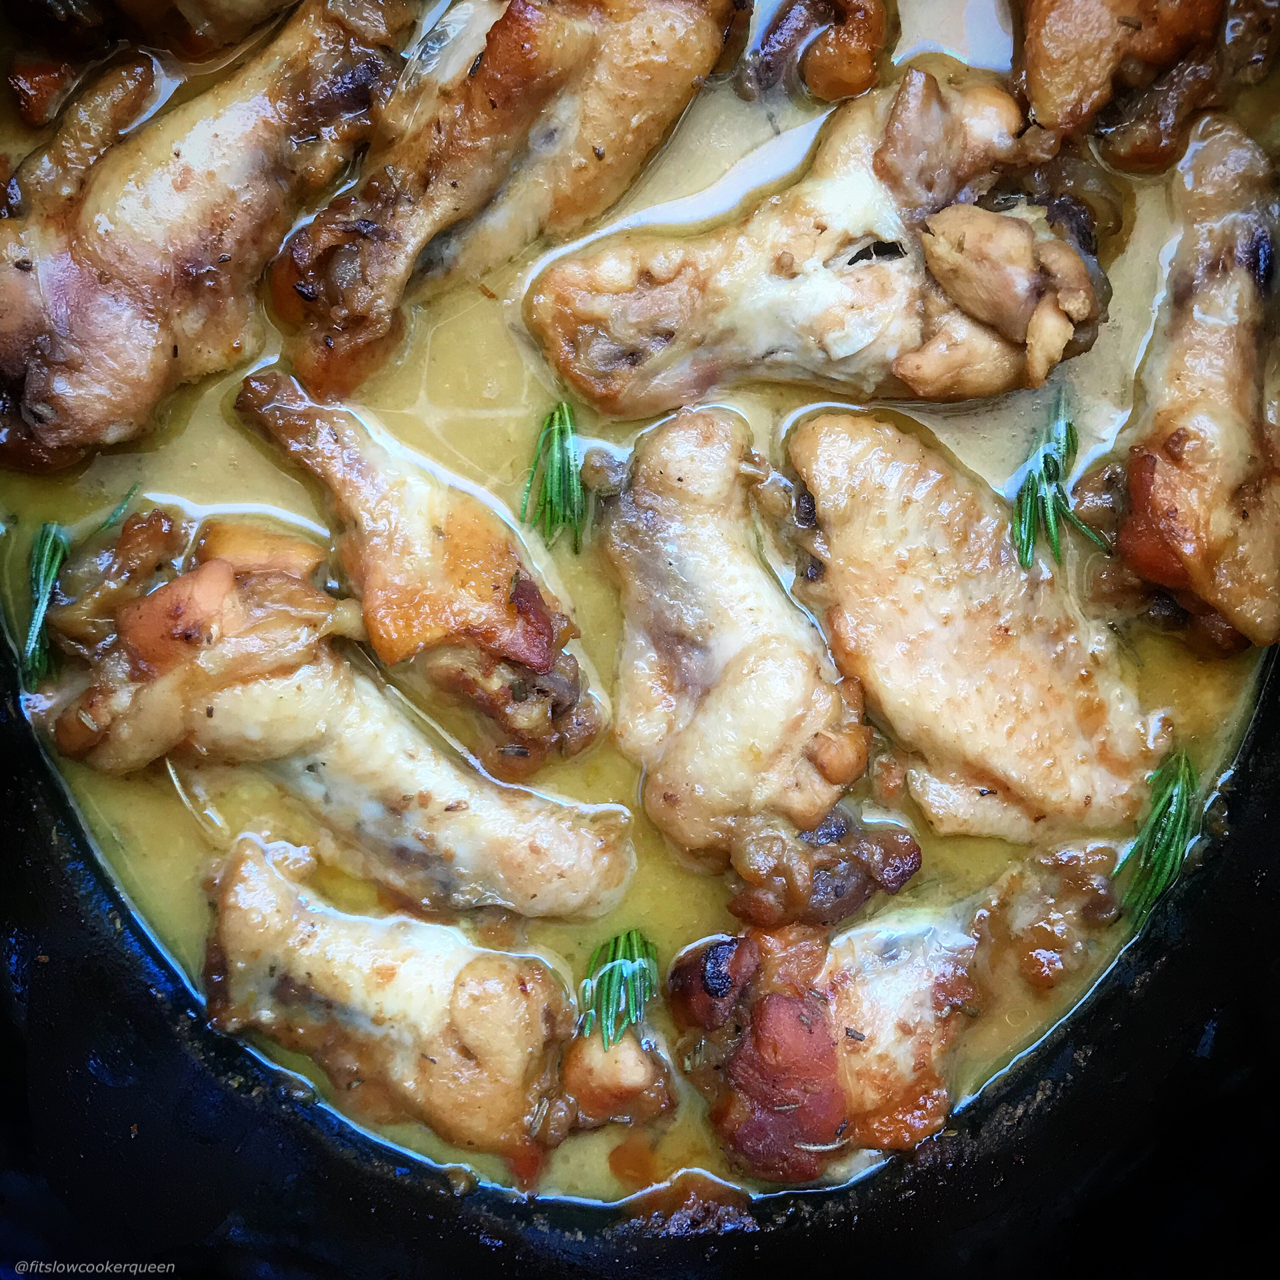 A homemade, paleo, honey mustard sauce slow cooks with chicken wings in this slow cooker recipe that's the perfect appetizer or game-day snack.